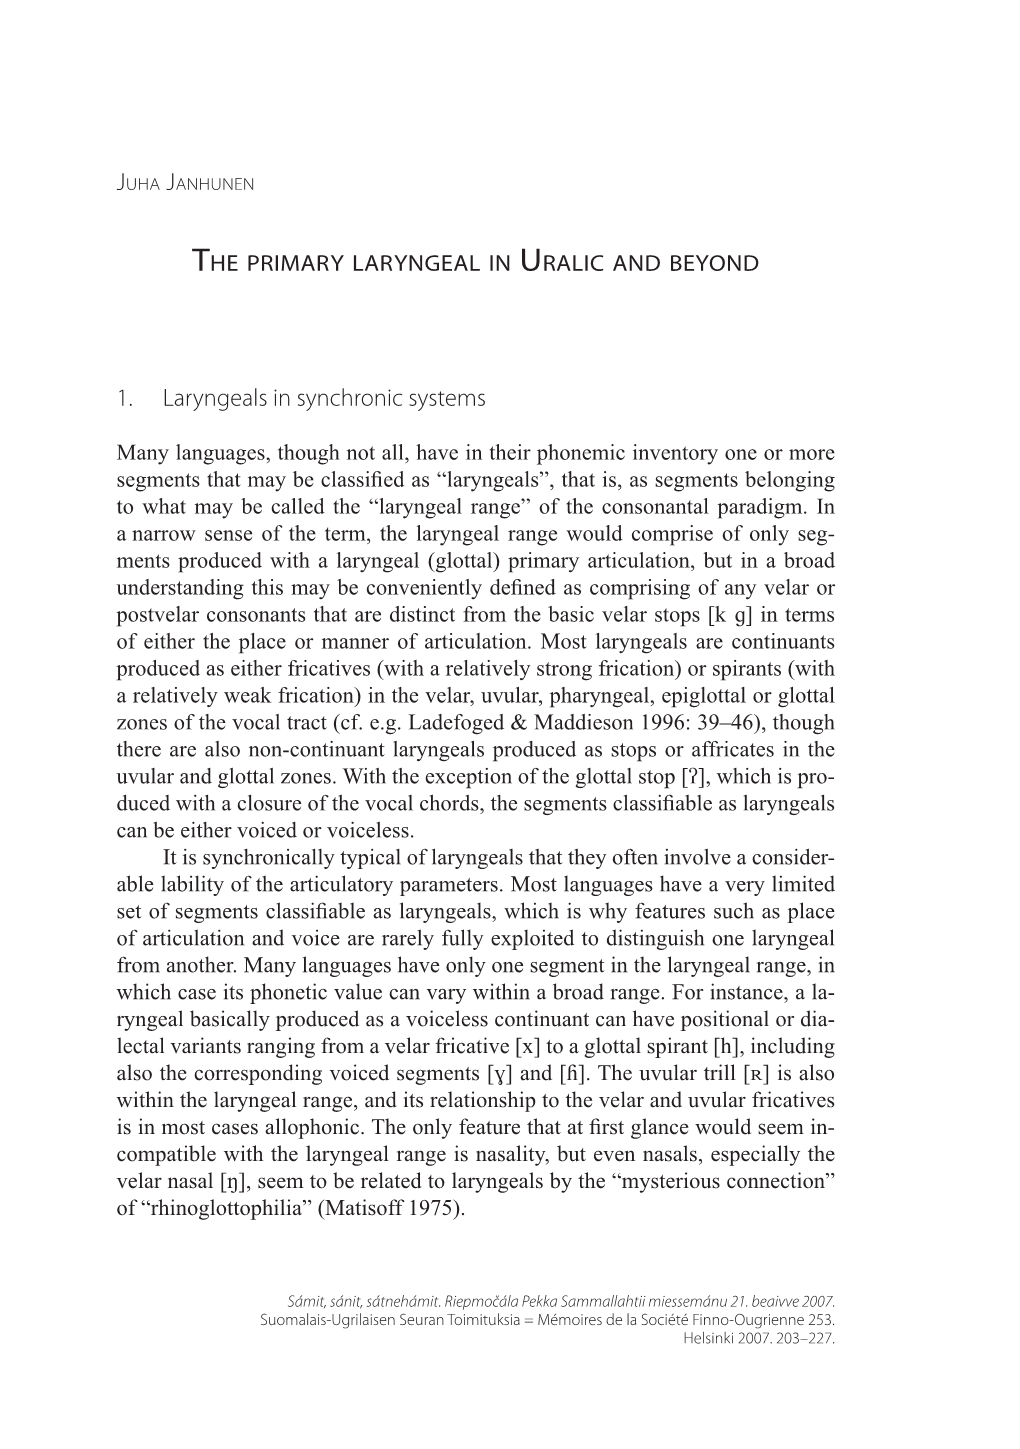 The Primary Laryngeal in Uralic and Beyond